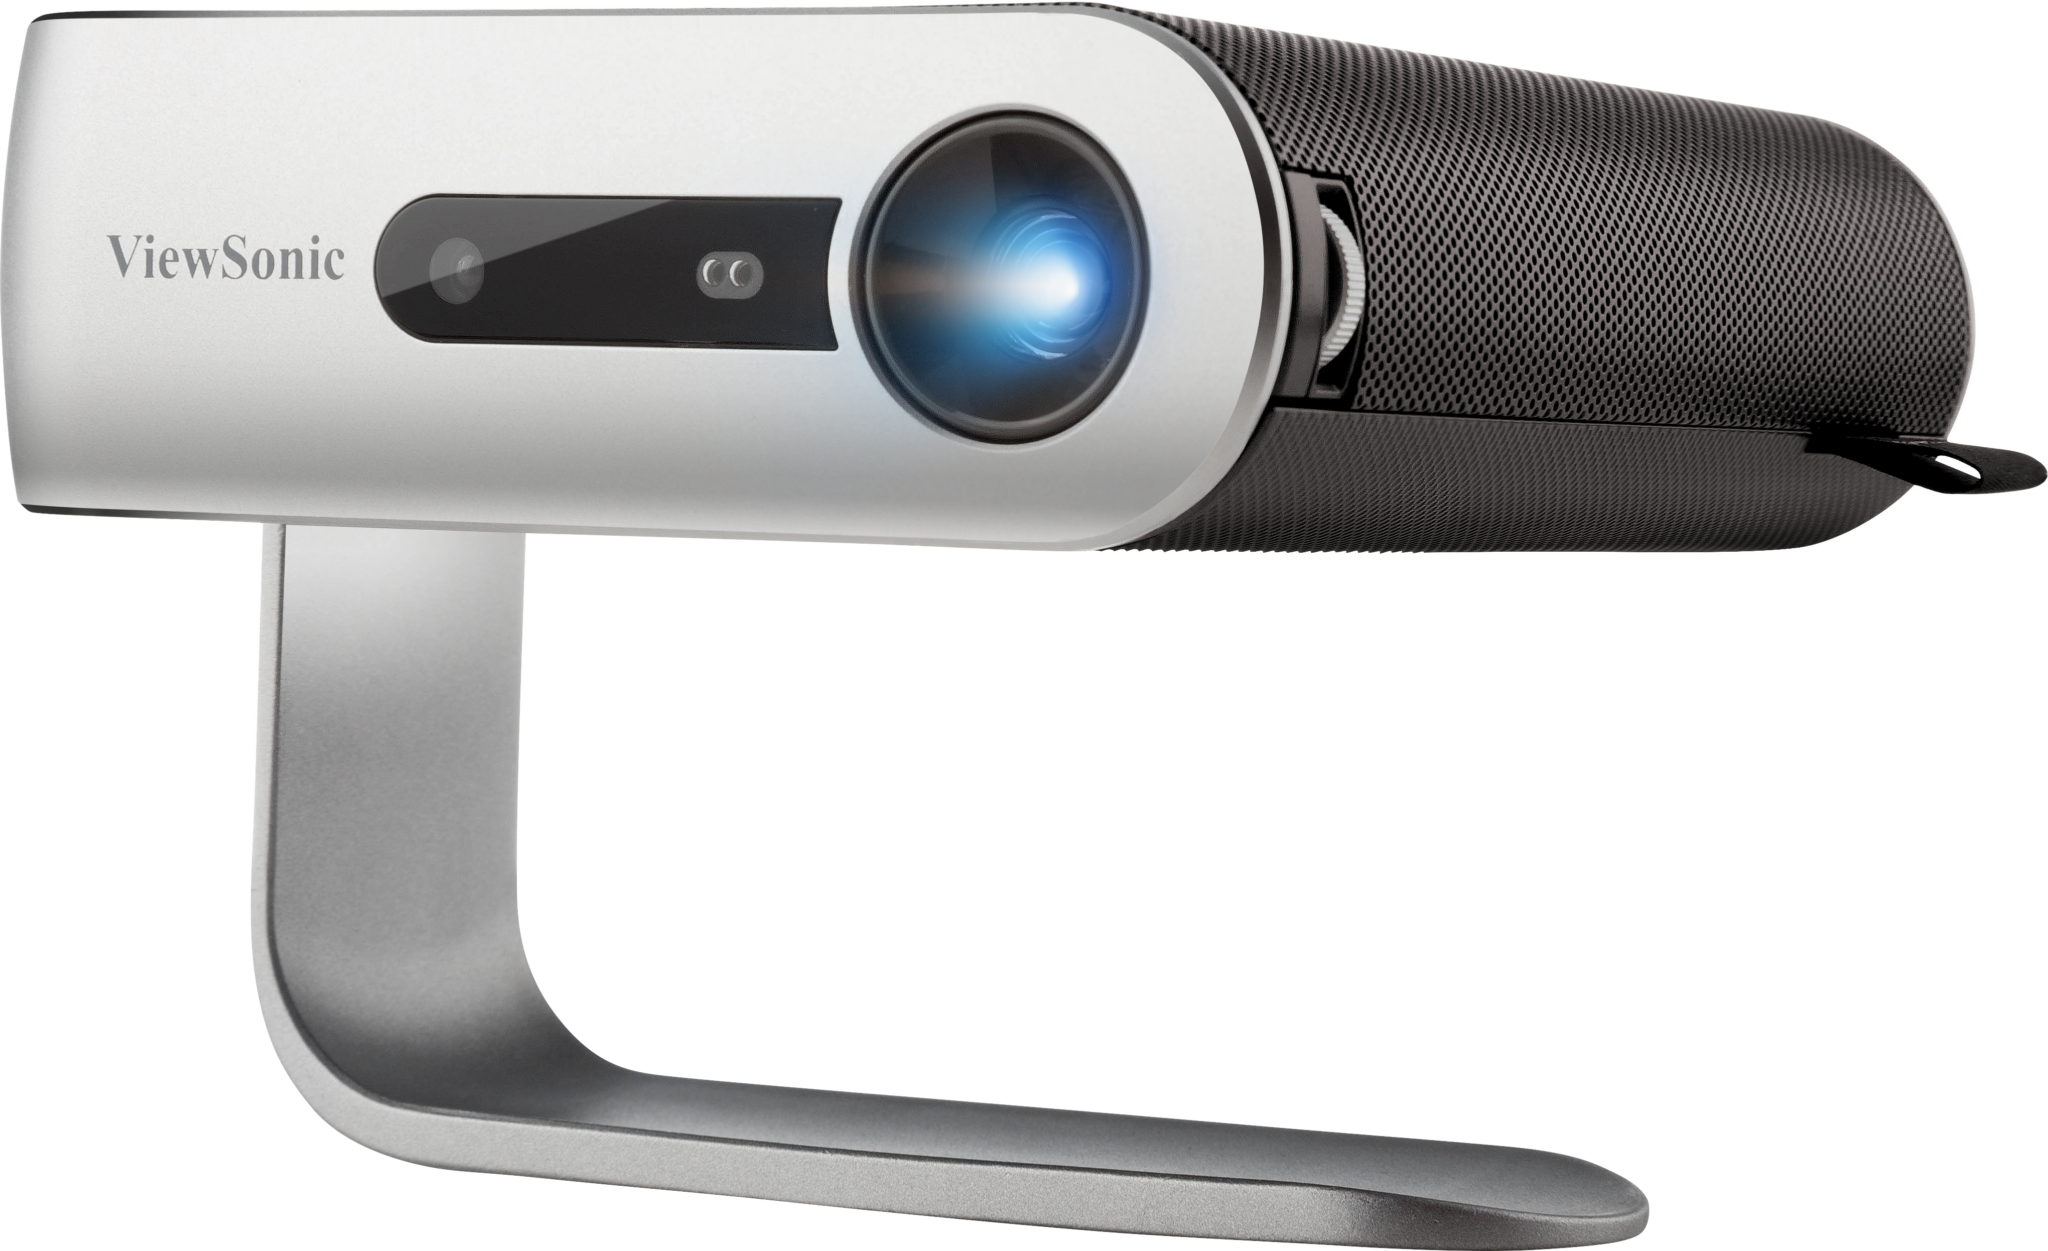 Viewsonic LED M1 projector